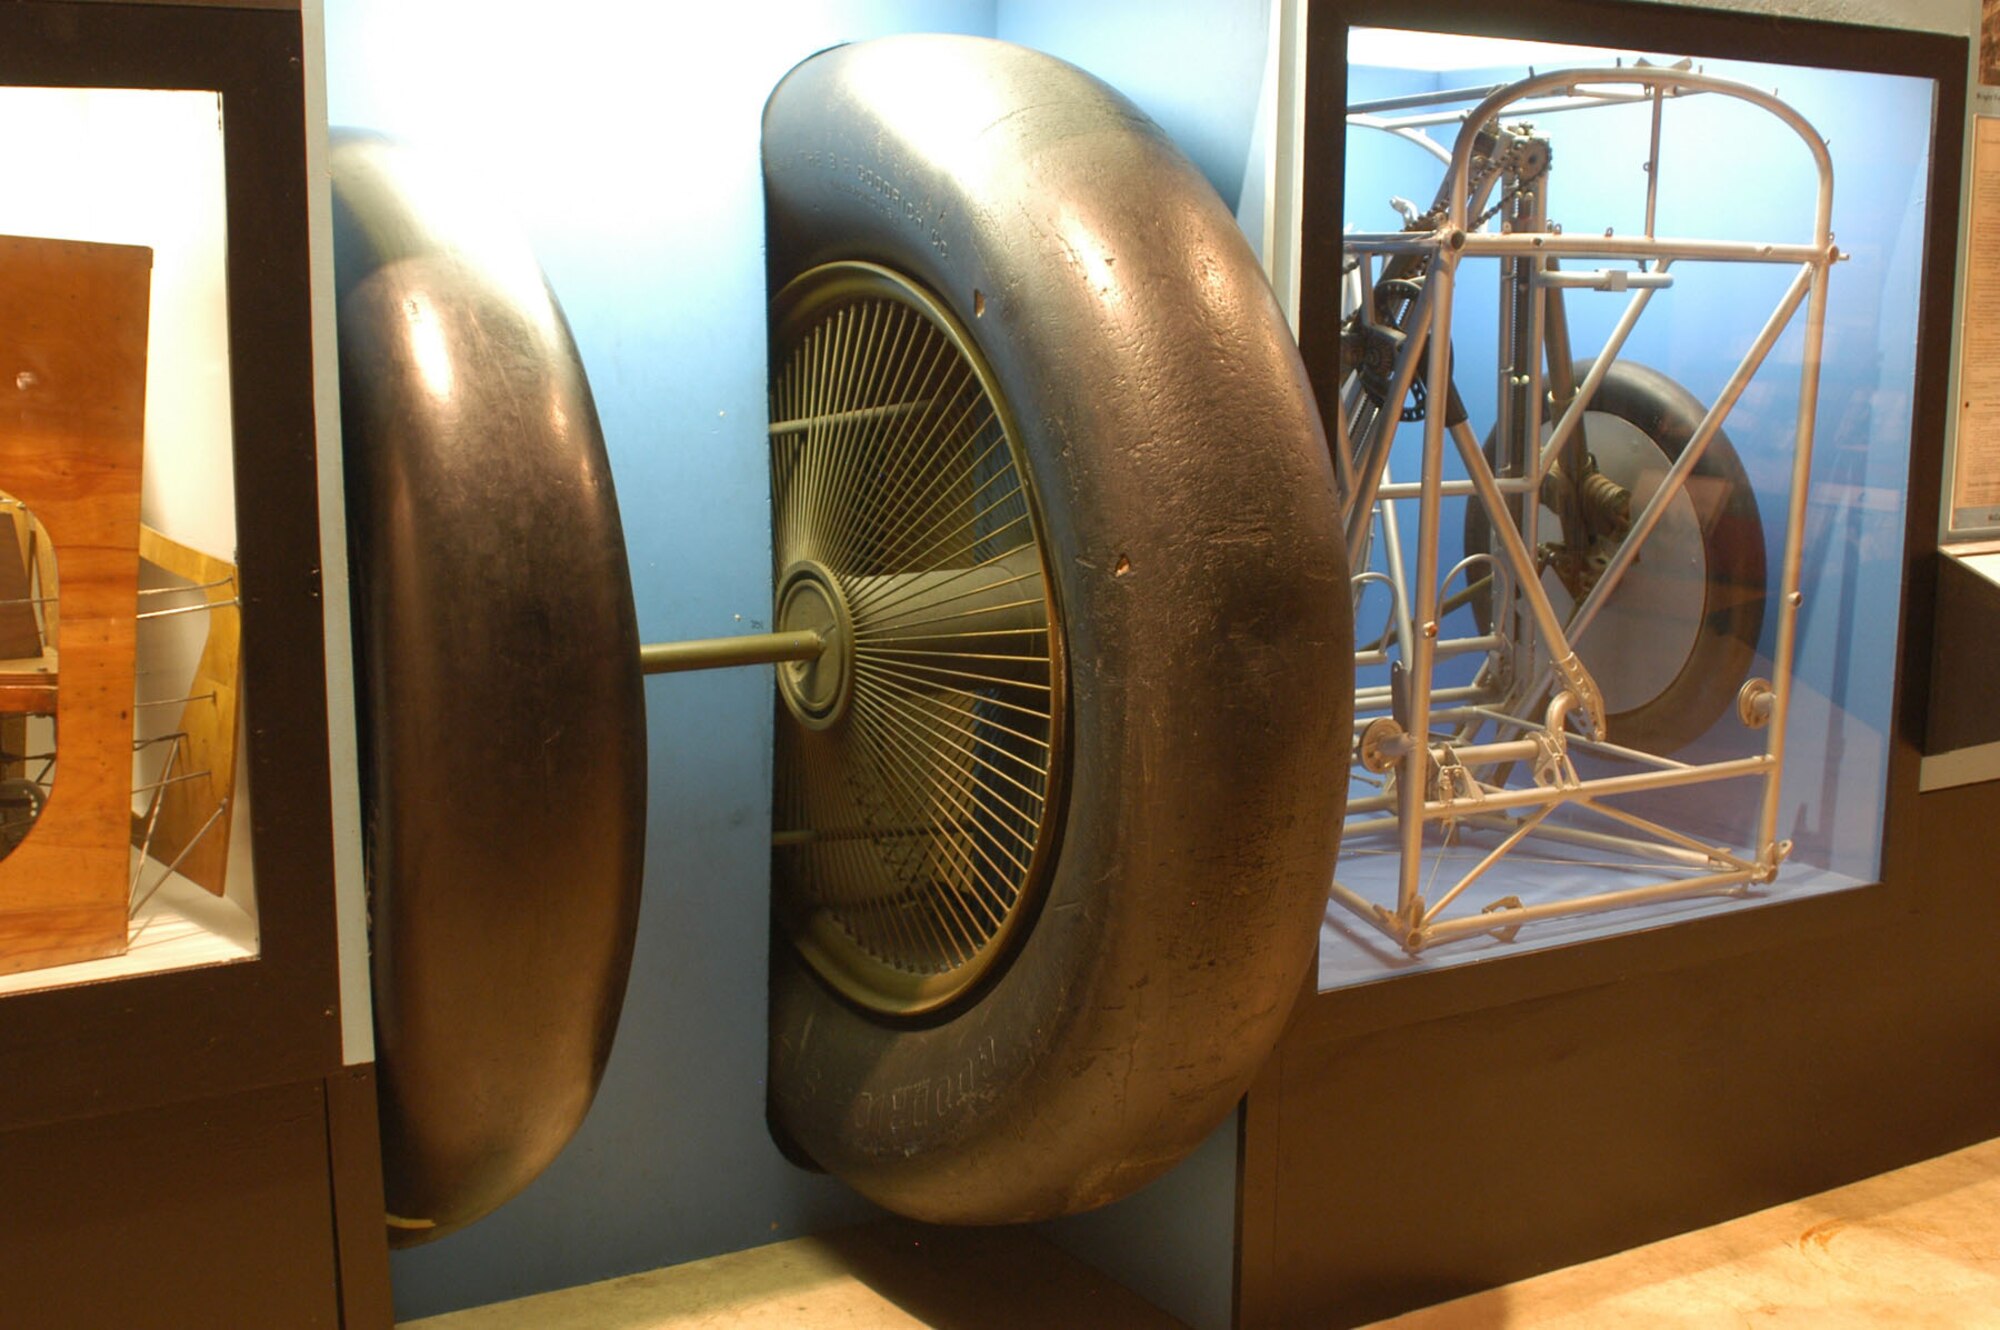 DAYTON, Ohio -- Barling Bomber wheels on display in the Early Years Gallery at the National Museum of the United States Air Force. (U.S. Air Force photo)